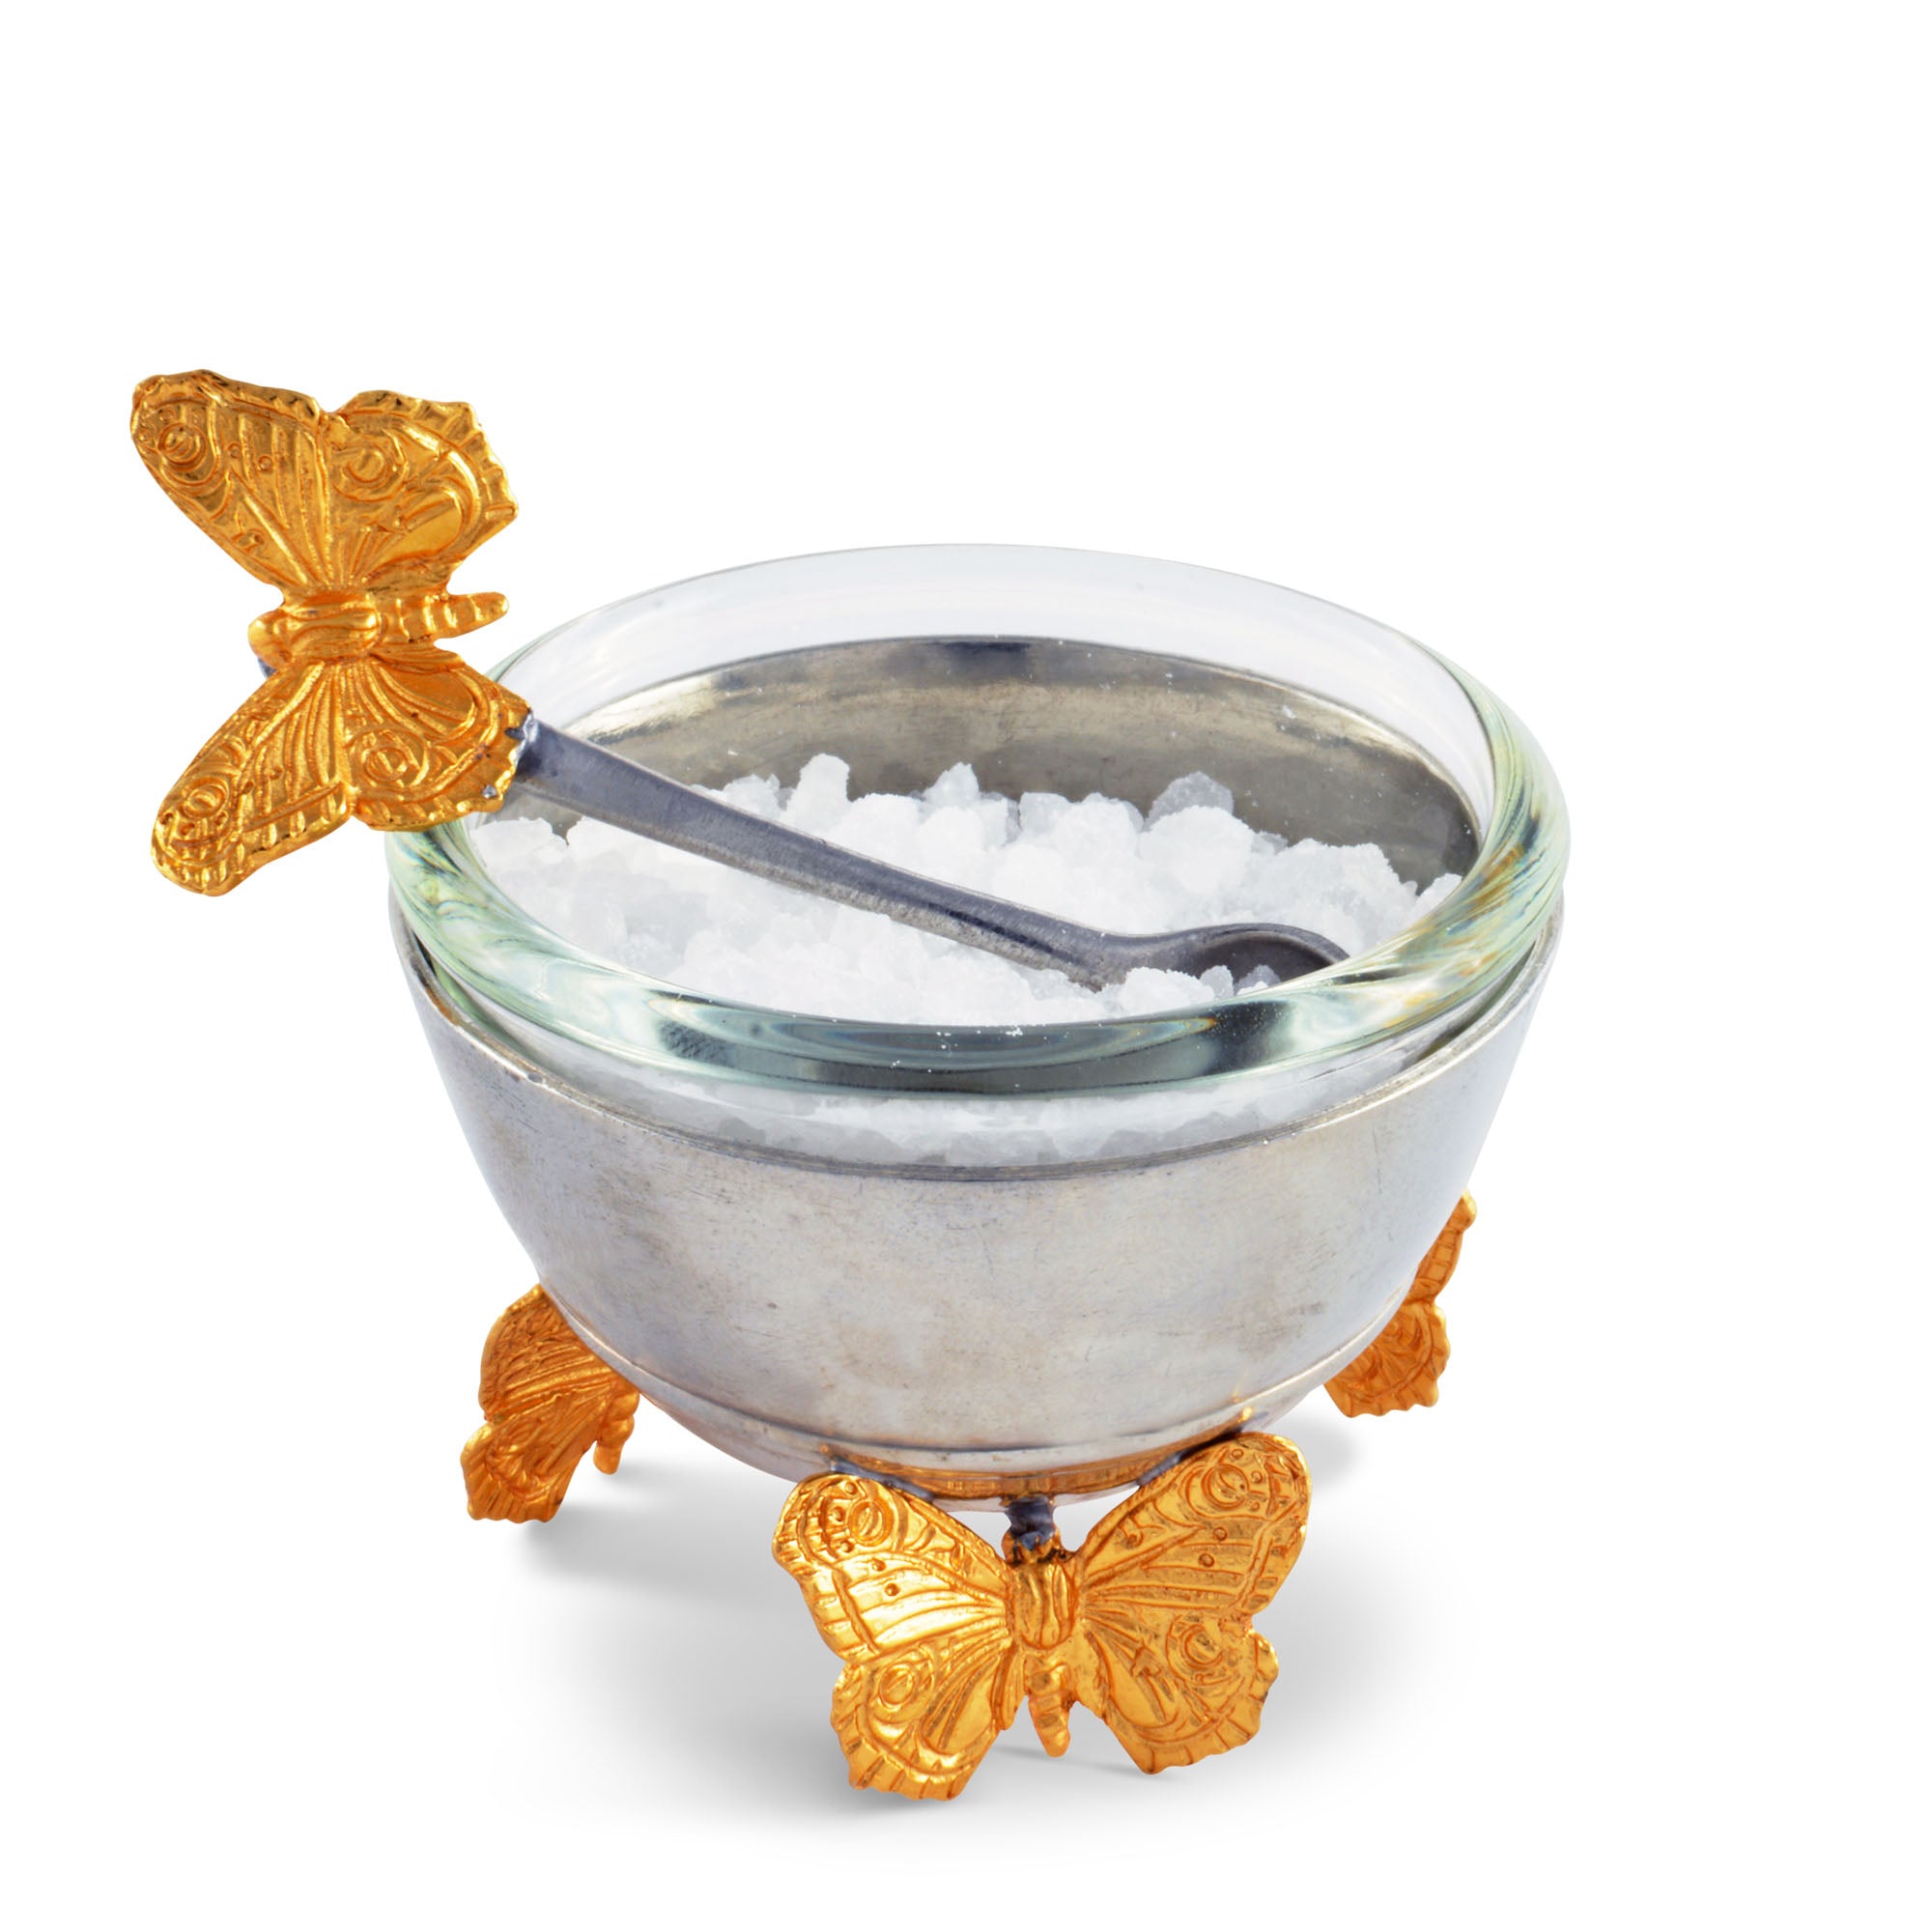 Vagabond House Gold Butterfly Salt Cellar with Spoon Product Image